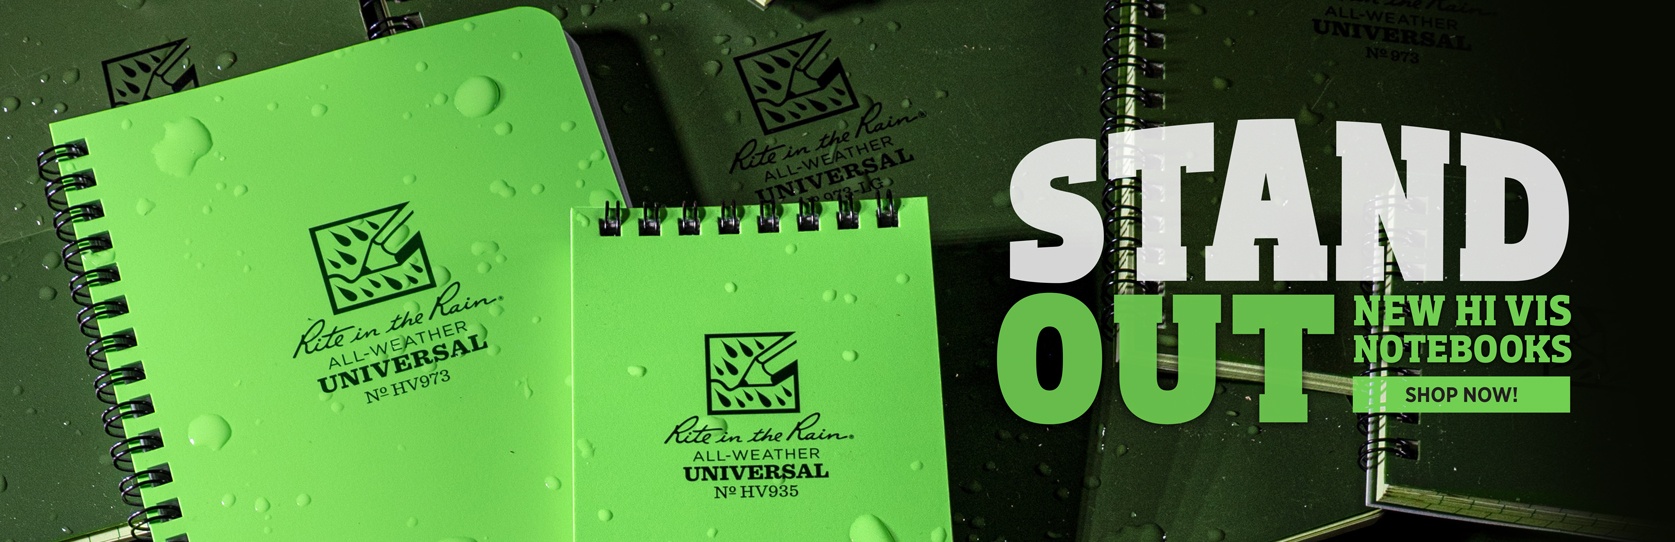 Stand out New Hi Vis Notebooks. Shop Now!